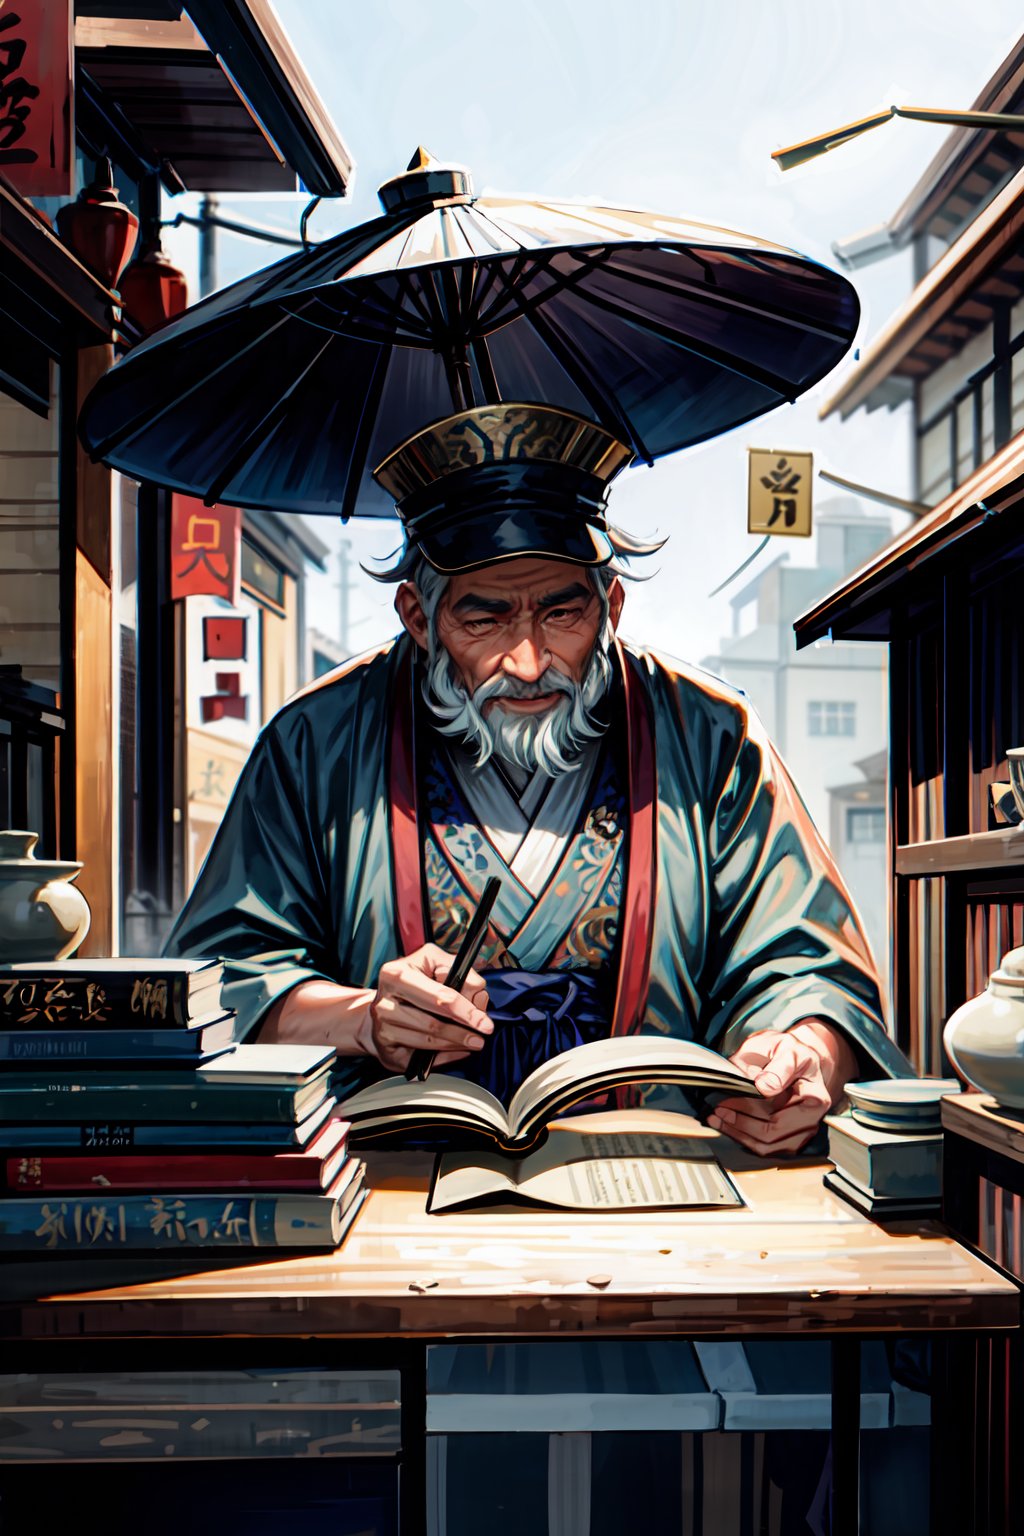 An ancient Chinese street scene, an independent and shabby small vendor, sitting there is an old gentleman, wearing an ancient Chinese hat and reading glasses, squinting and smiling, with a white beard on both sides, a white goatee on the chin, and wearing a Hanfu robe , holding a big brush in his hand and a big abacus on the table